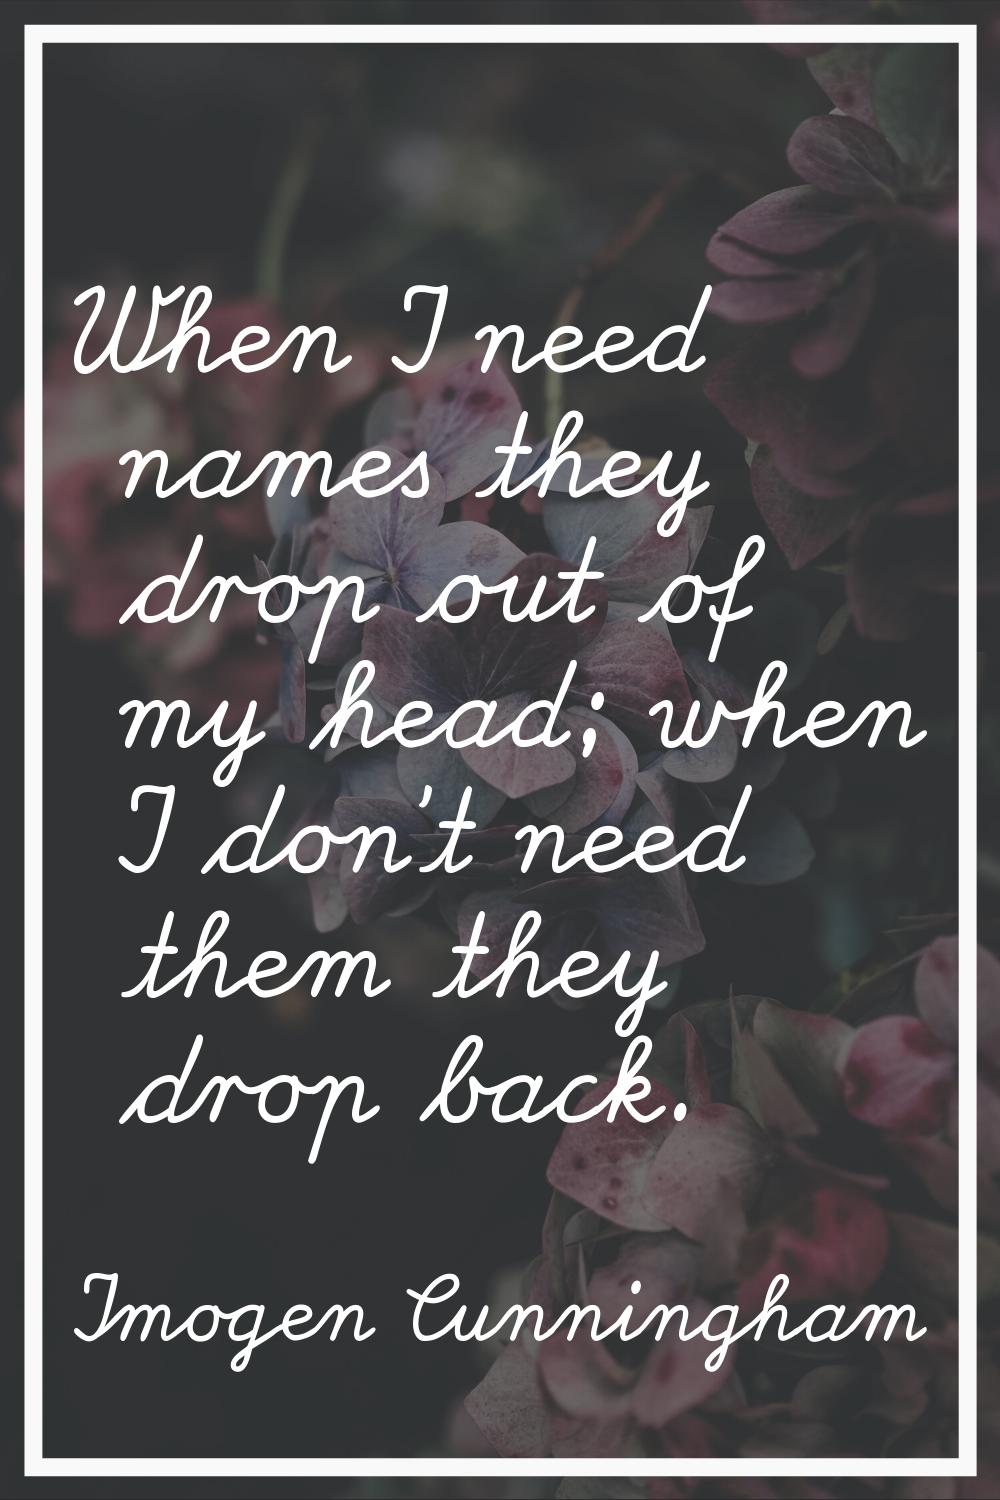 When I need names they drop out of my head; when I don't need them they drop back.